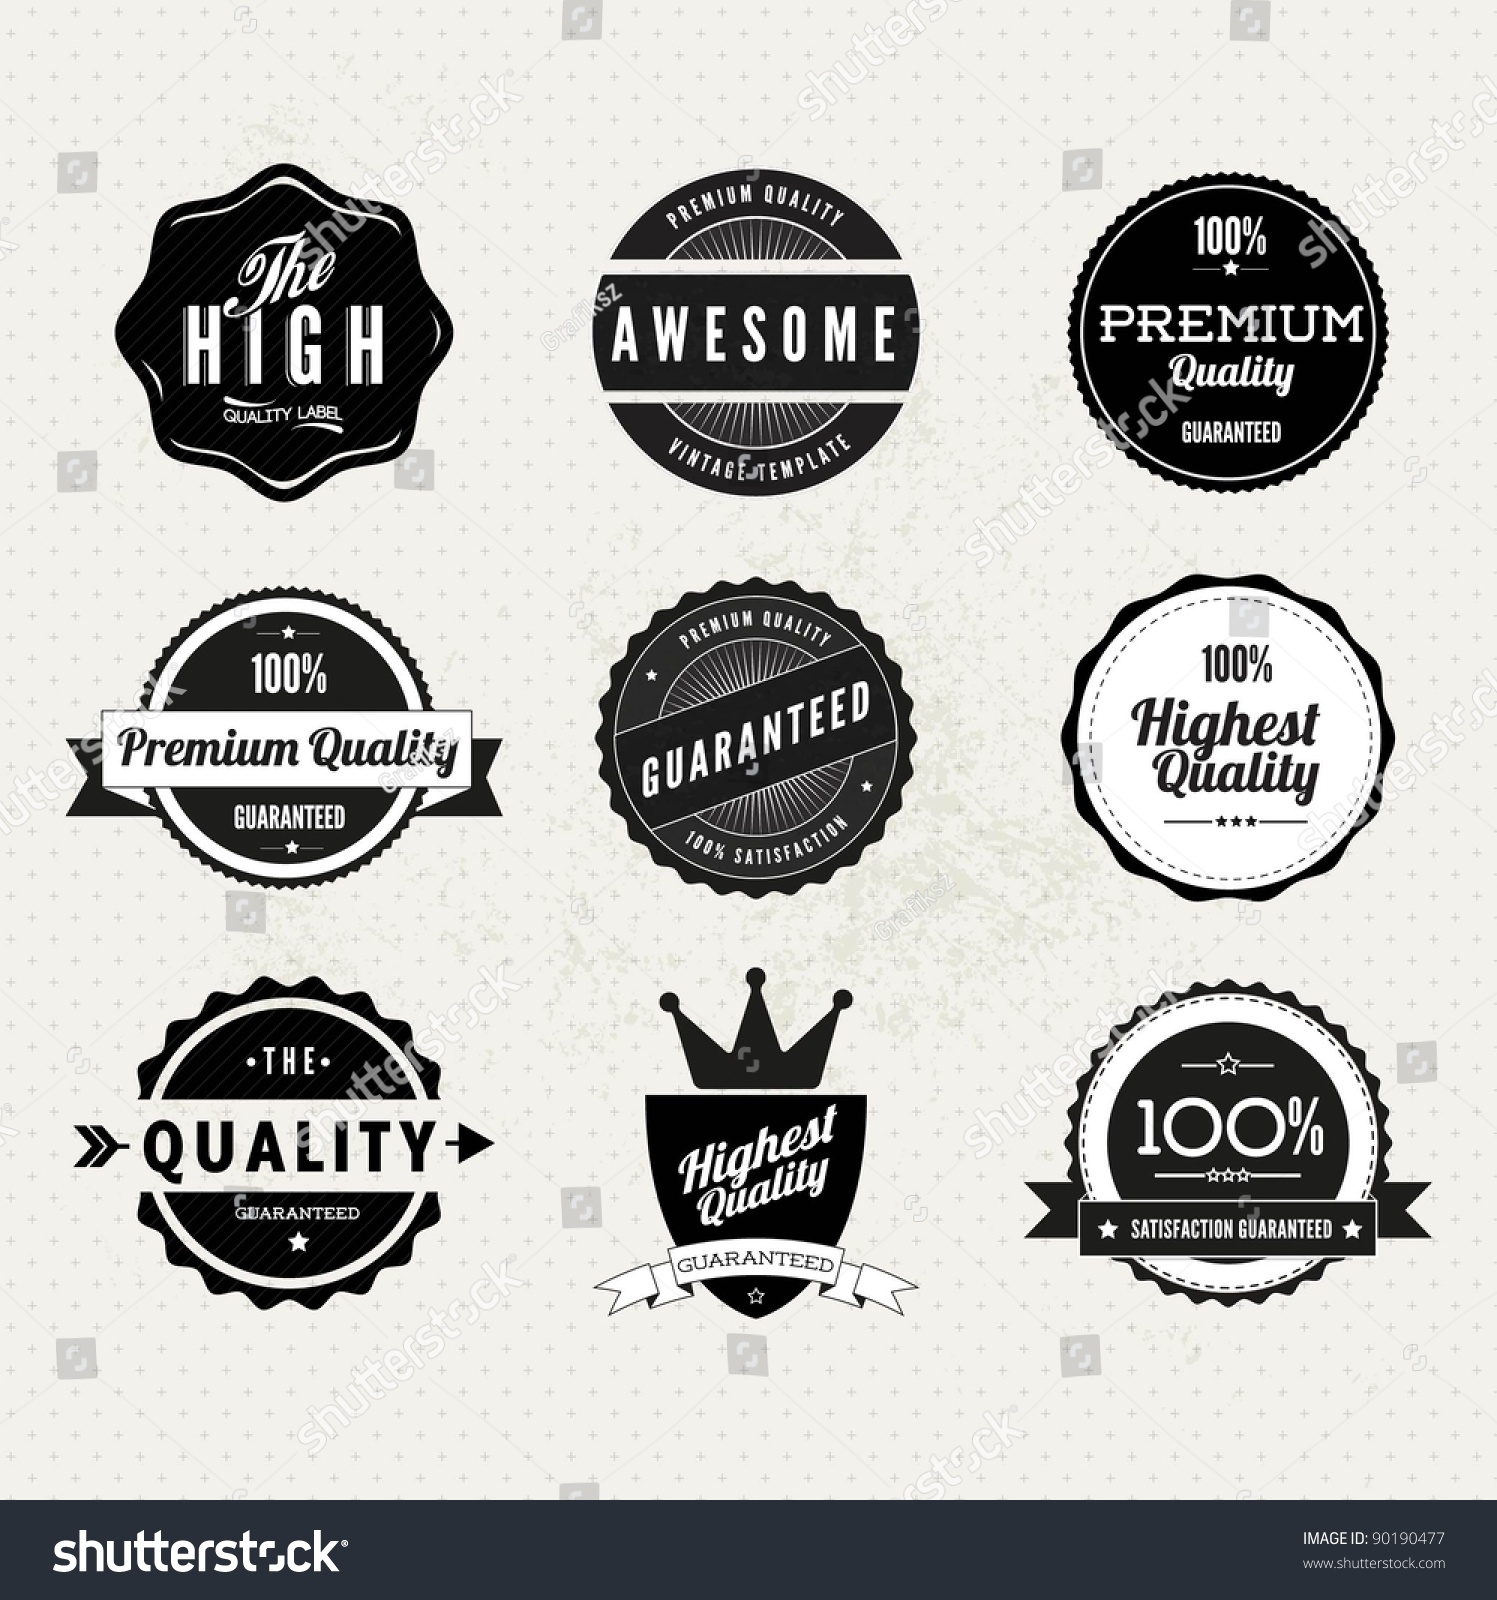 Collection of Premium Quality and Guarantee Labels with retro vintage styled design #90190477